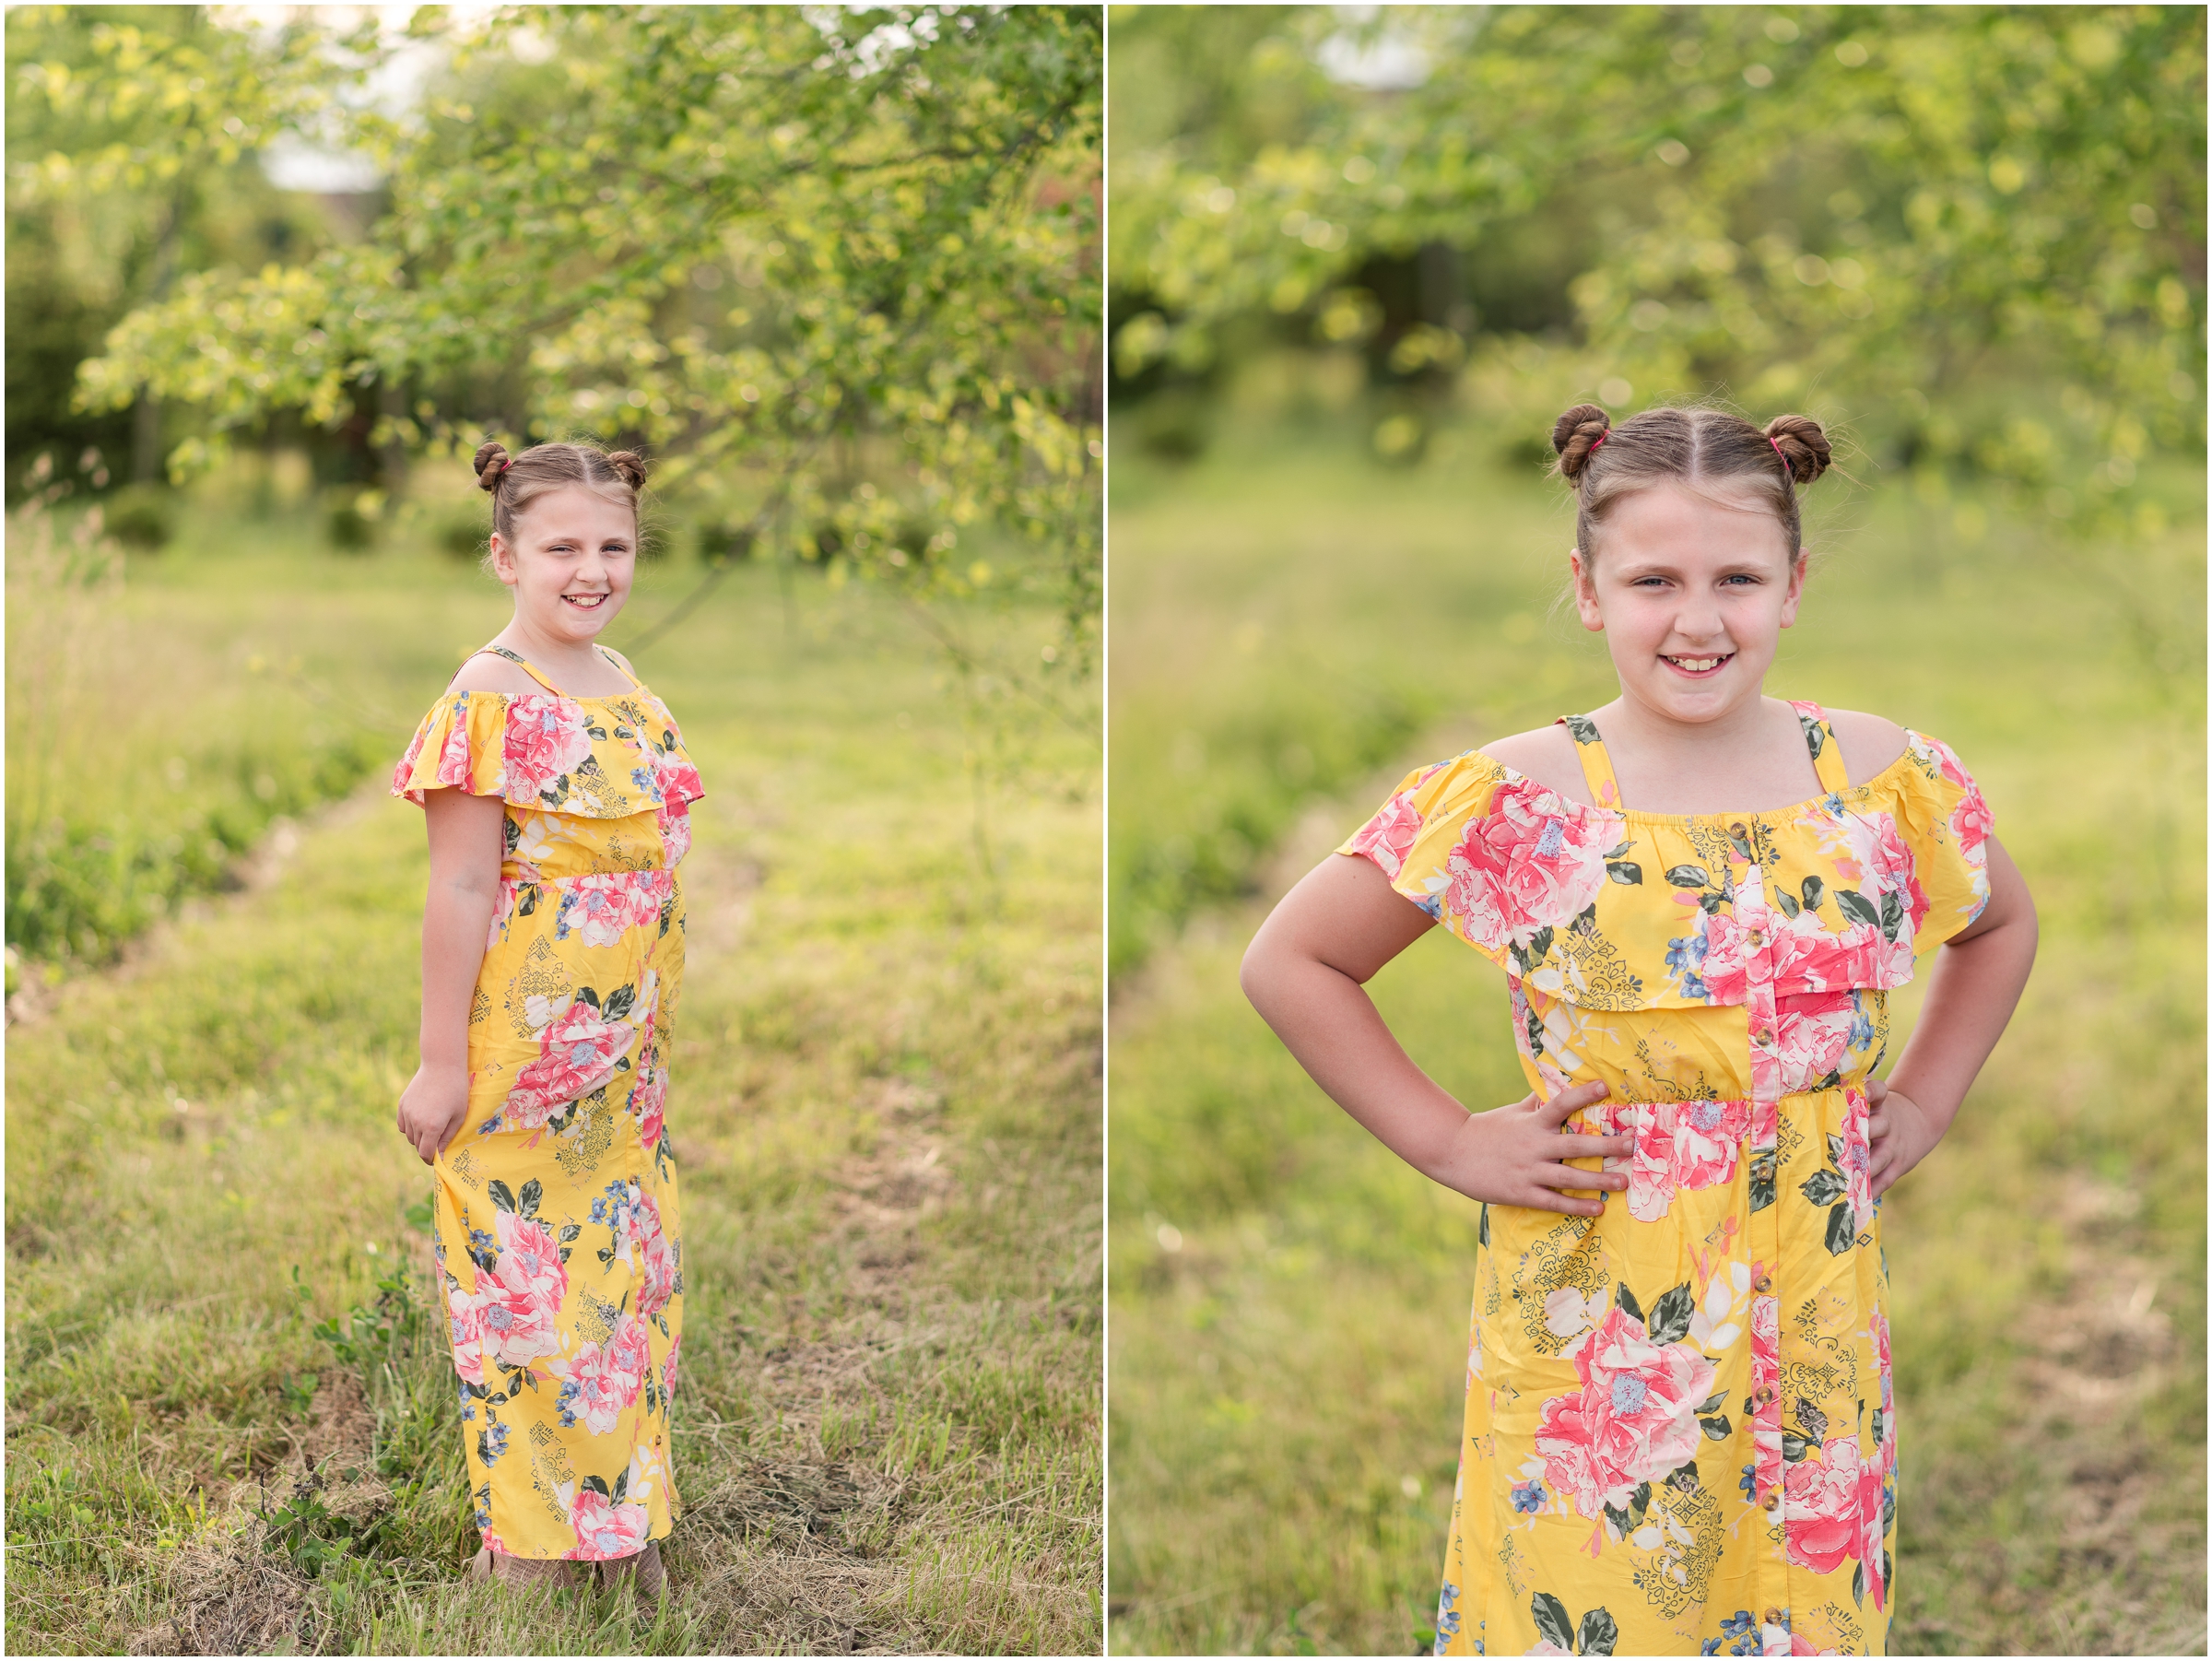 Spring Kids photos in yellow dresses